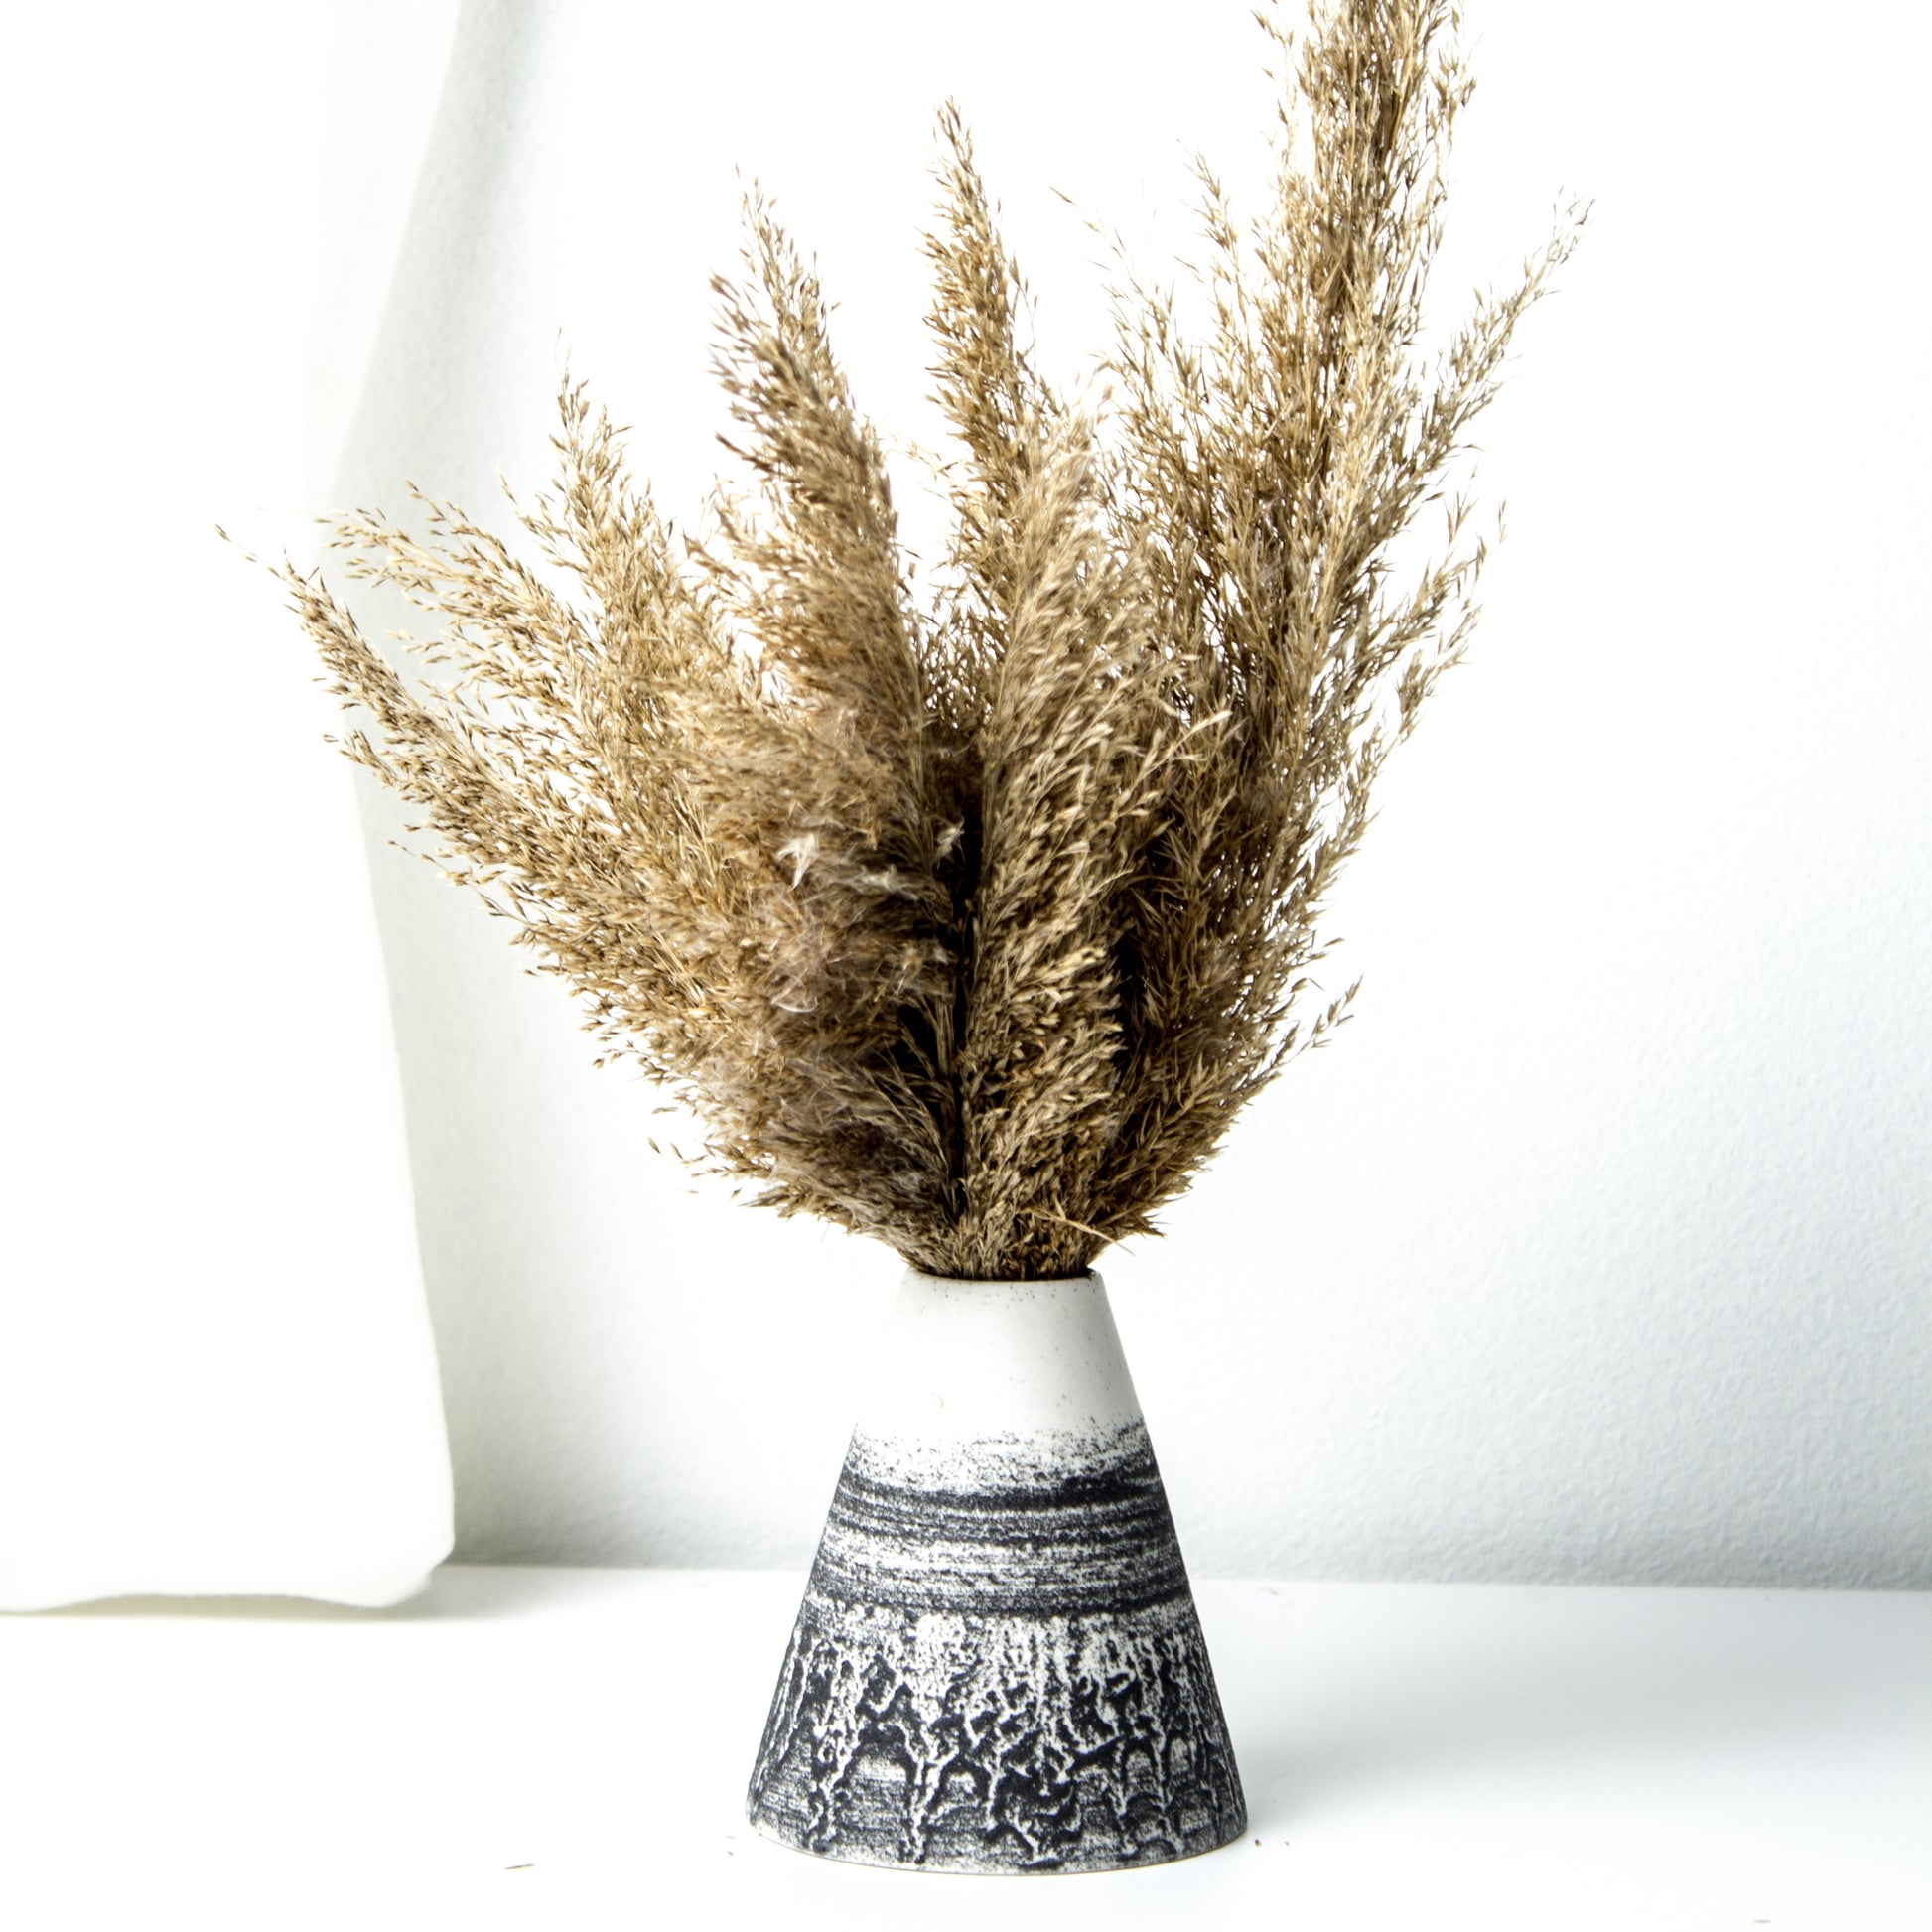 -Cone Shape Vases in 3 sizes l Home / Office / Cafe Deco -Clear glaze on white porcelain clay -Modern simple shape + natural texture *Basalt Collection Drawing of mixture of dark minerals. The unique organic drawing is applied in a rotation motion of my wheel.